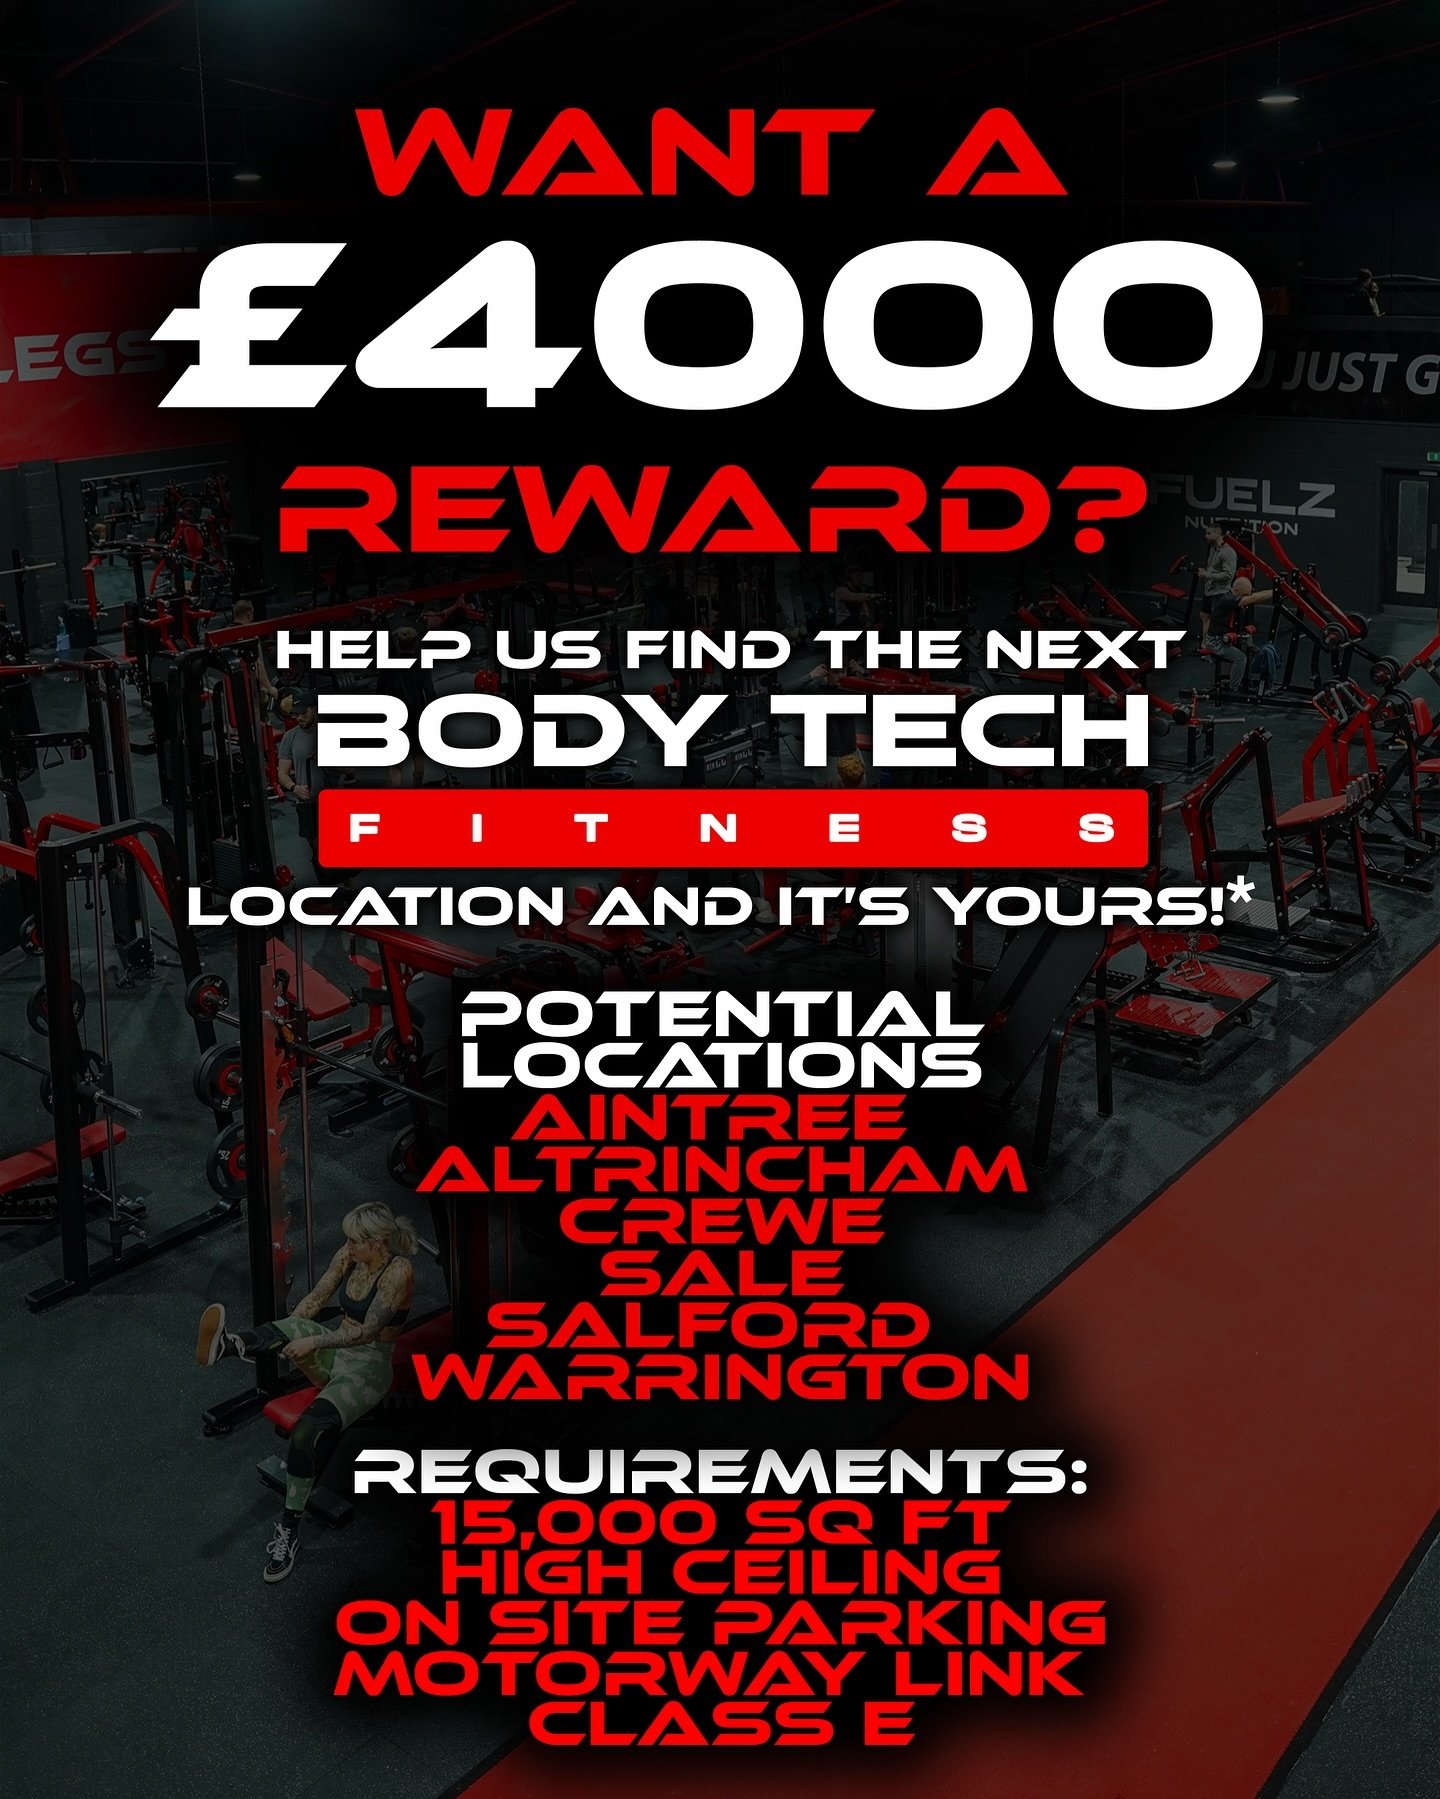 ❤️💵 WE&rsquo;RE OFFERING A &pound;4000 REWARD 💵❤️

We are on the lookout for our next gym location and we&rsquo;re offering a &pound;4000 reward for the introduction that leads us to our next home. 

Tag, share and let everybody know that we&rsquo;